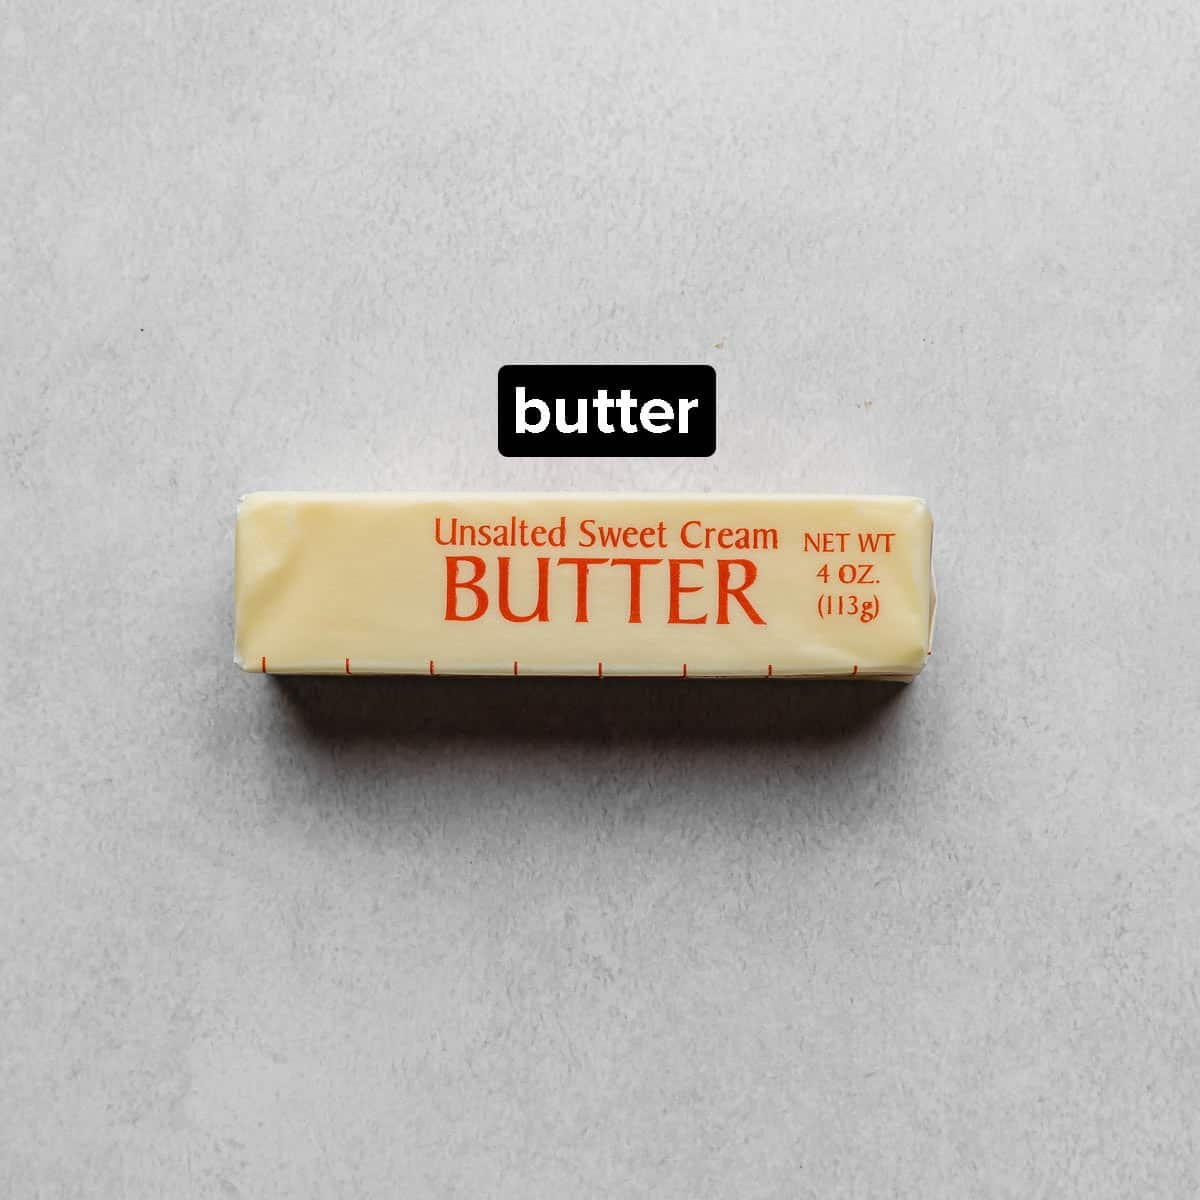 A stick of unsalted butter on a gray background.